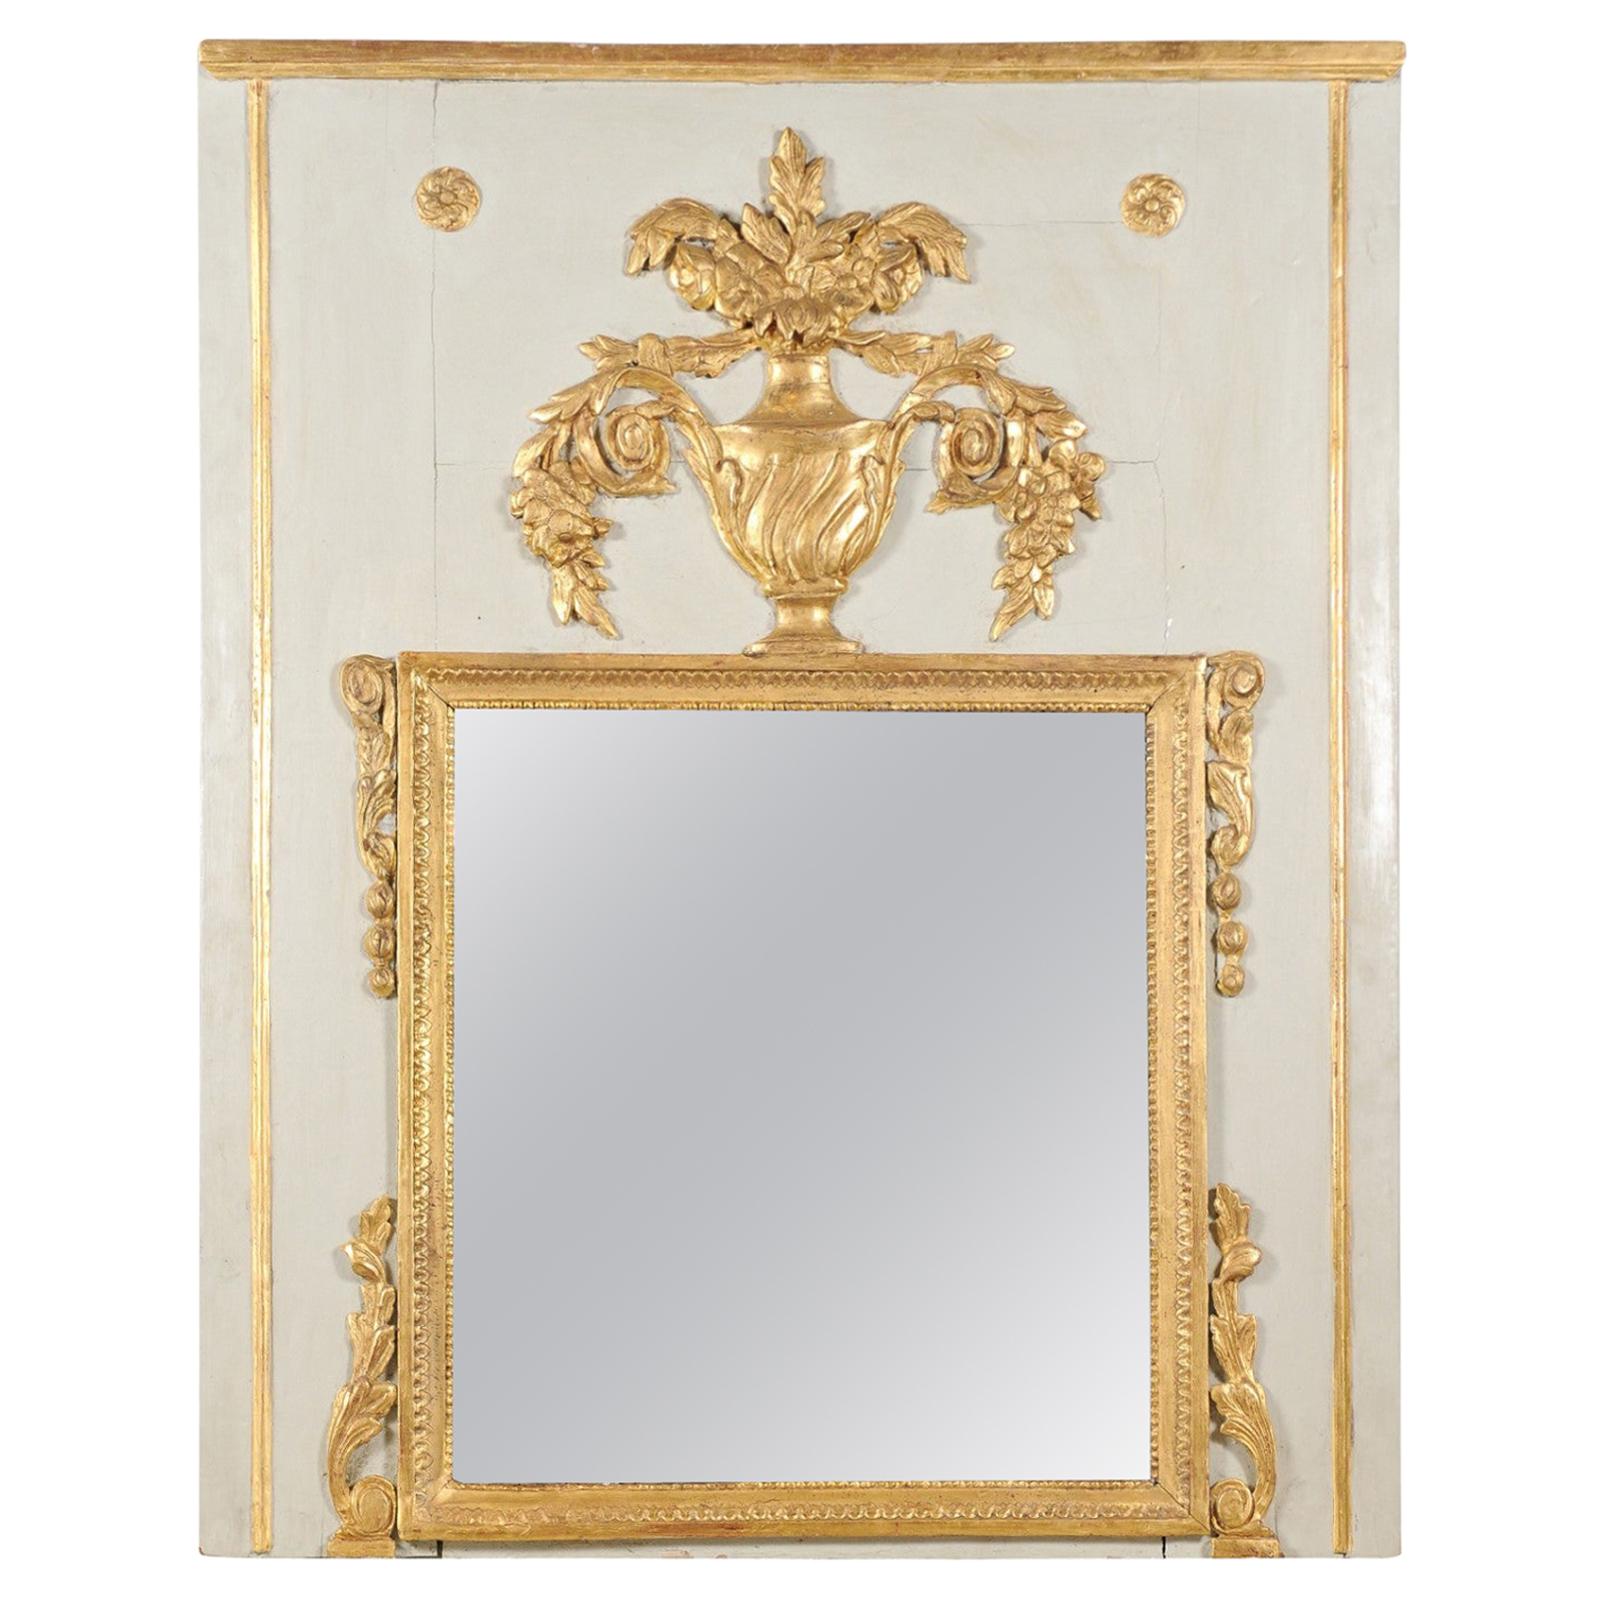 French 1775 Transition Period Painted and Gilt Trumeau Mirror with Carved Urn For Sale